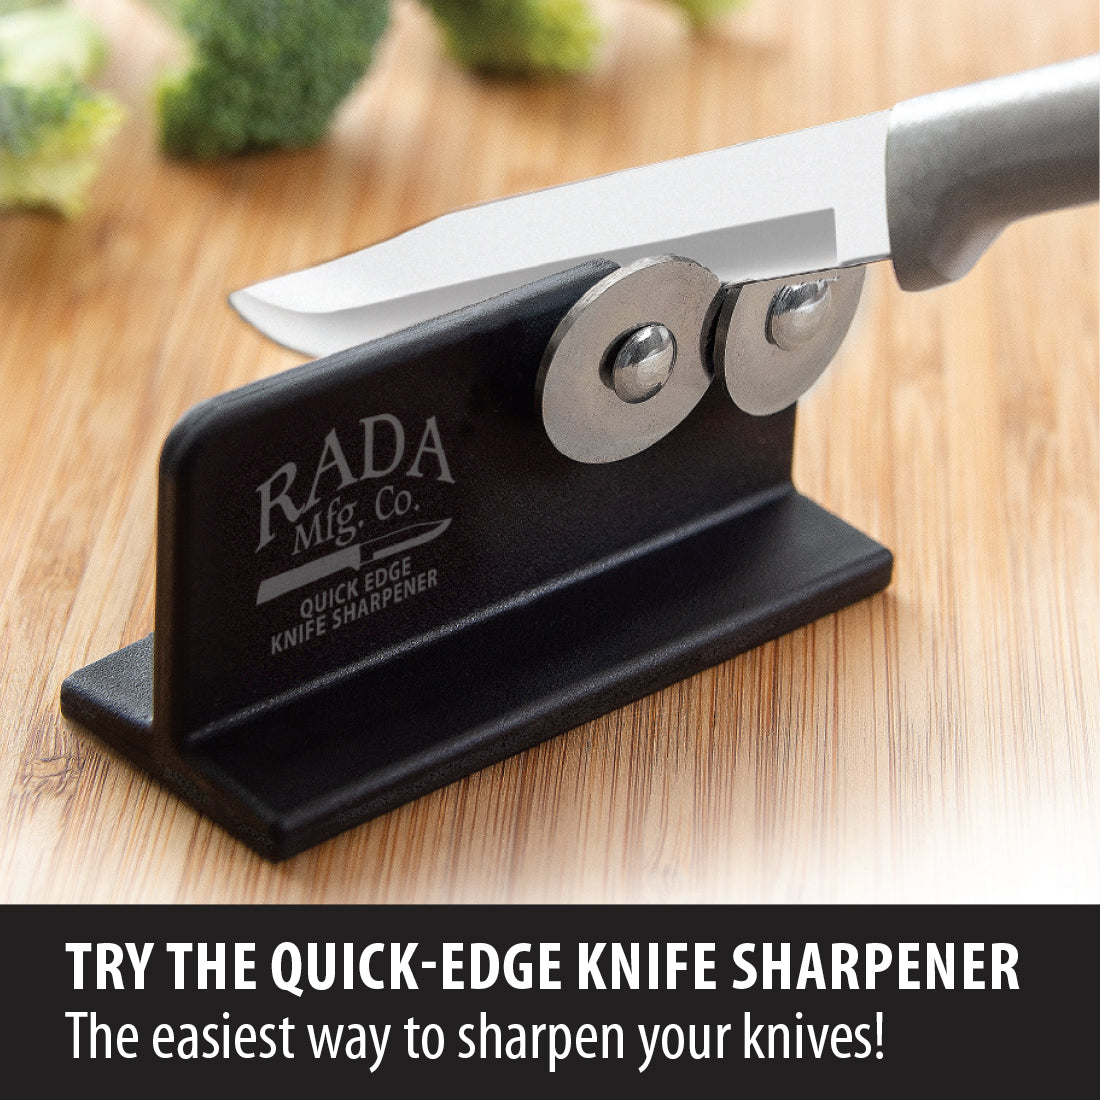 Rada Cutlery Regular Serrated Paring Knife – Stainless Steel Blade with Stainless Steel Resin Handle, 6-3/4 Inches